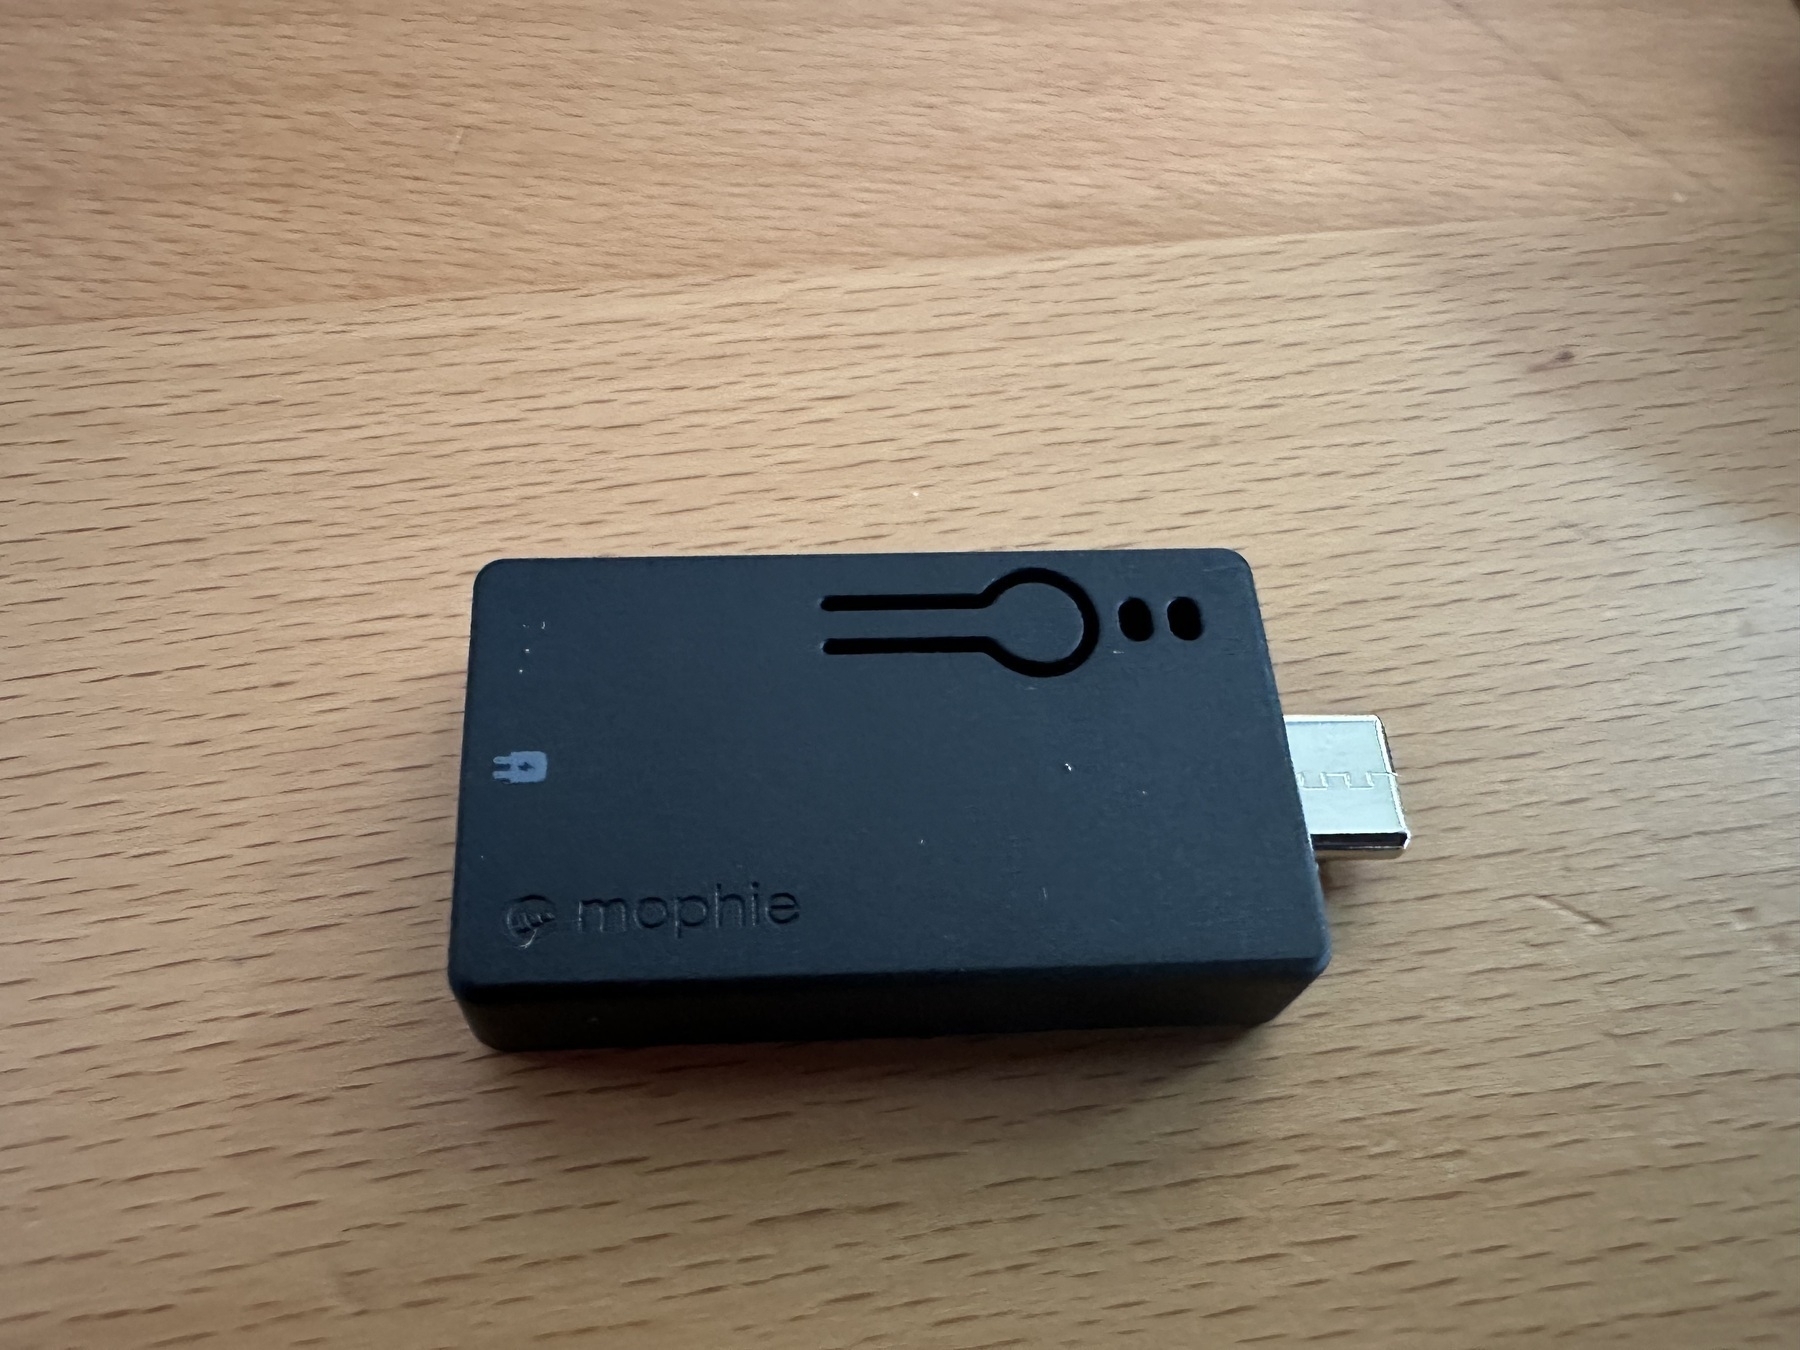 Small black USB key with a button